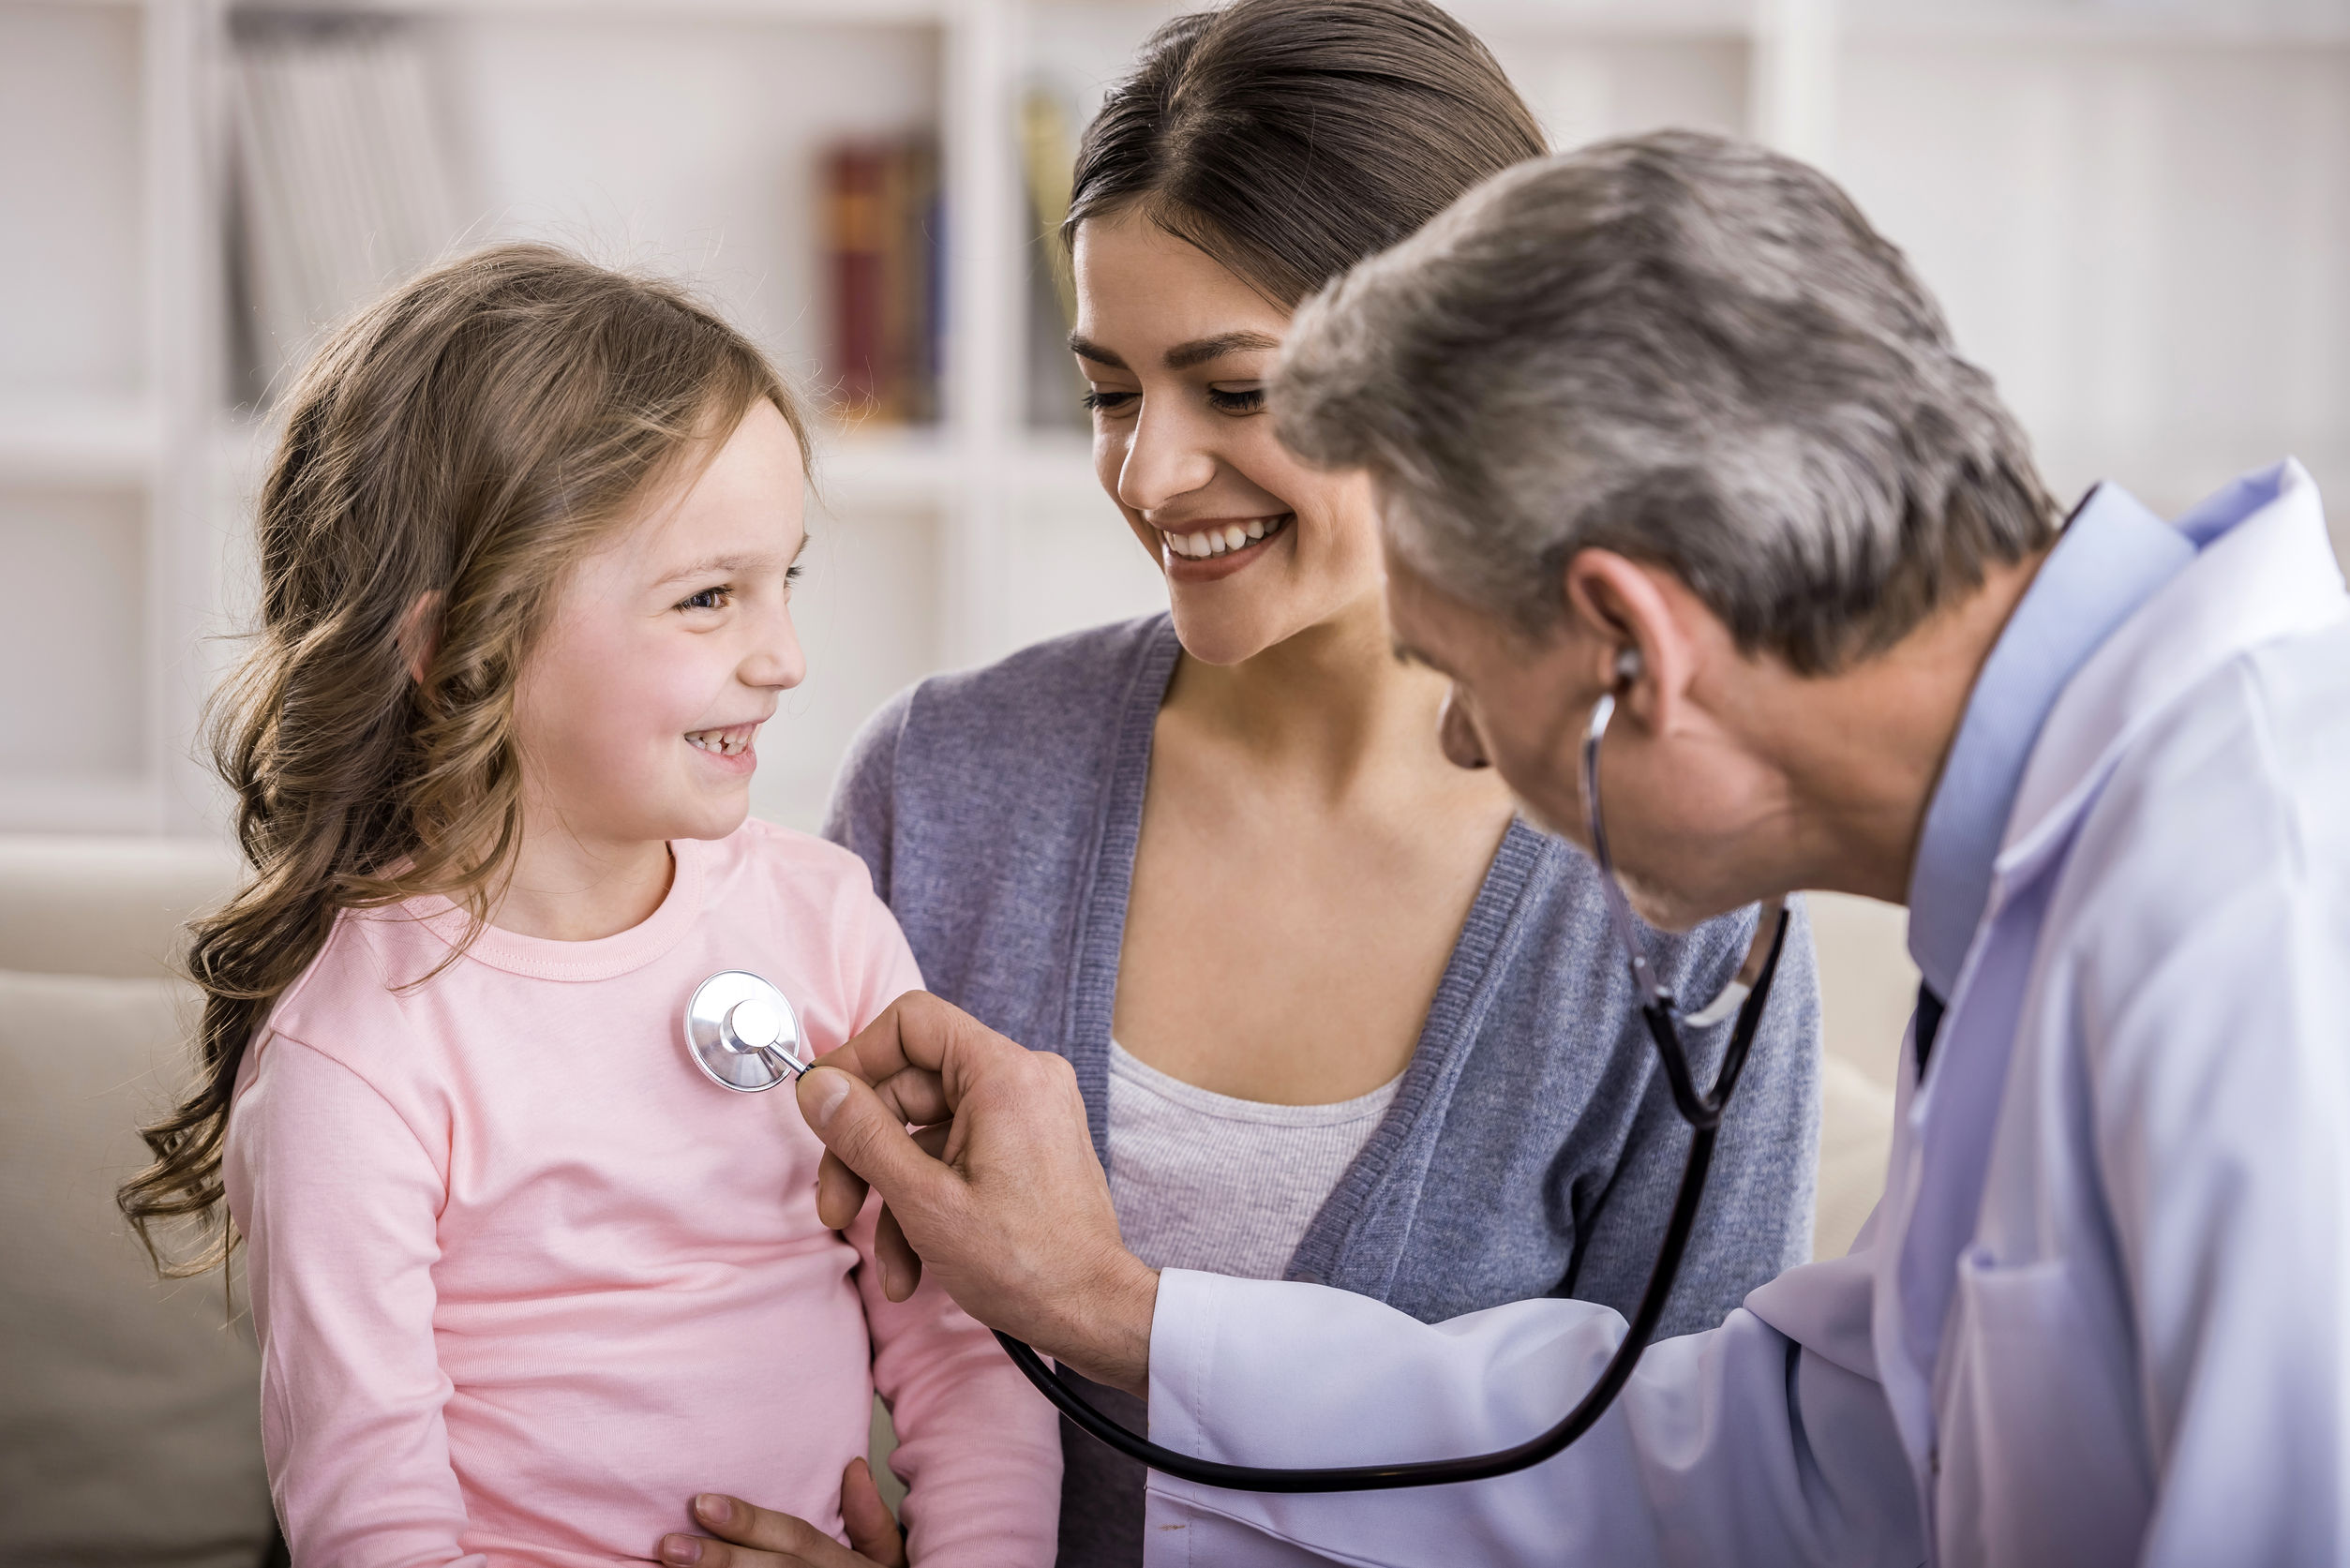 Should the whole family have the same doctor?